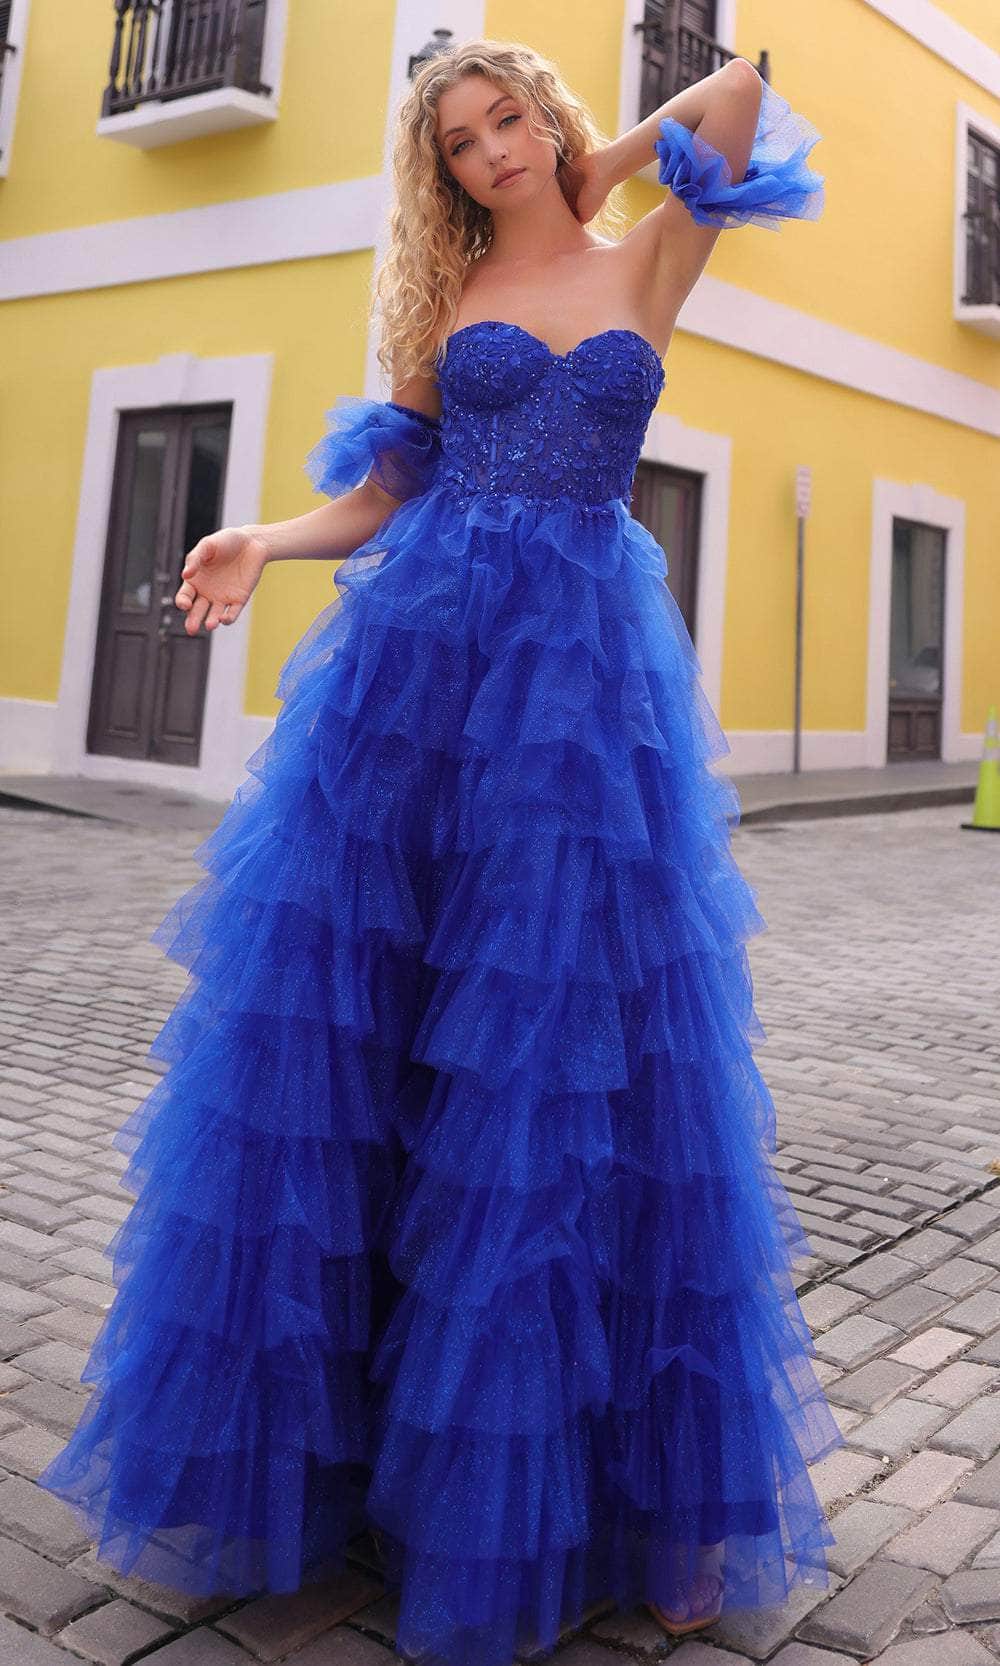 Nox Anabel T1338 - Strapless Ruffled Prom Dress Special Occasion Dress 0 / Royal Blue